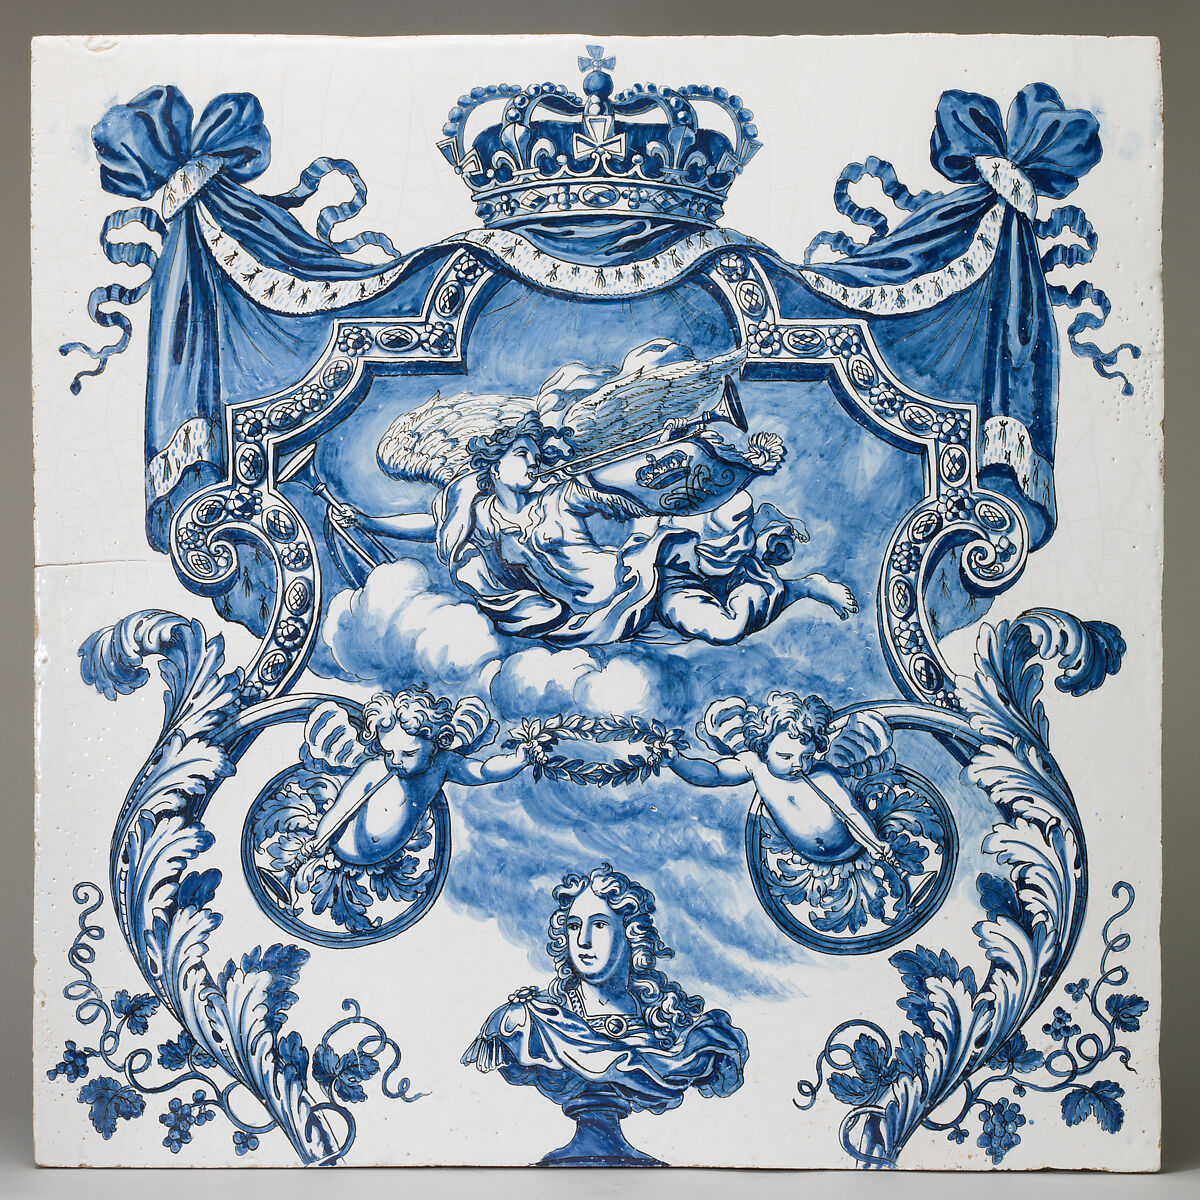 Tile with a bust of William III (1650–1702), Period of Adrianus Kocx (working 1689–94), Delftware (tin-glazed earthenware), Dutch, Delft 